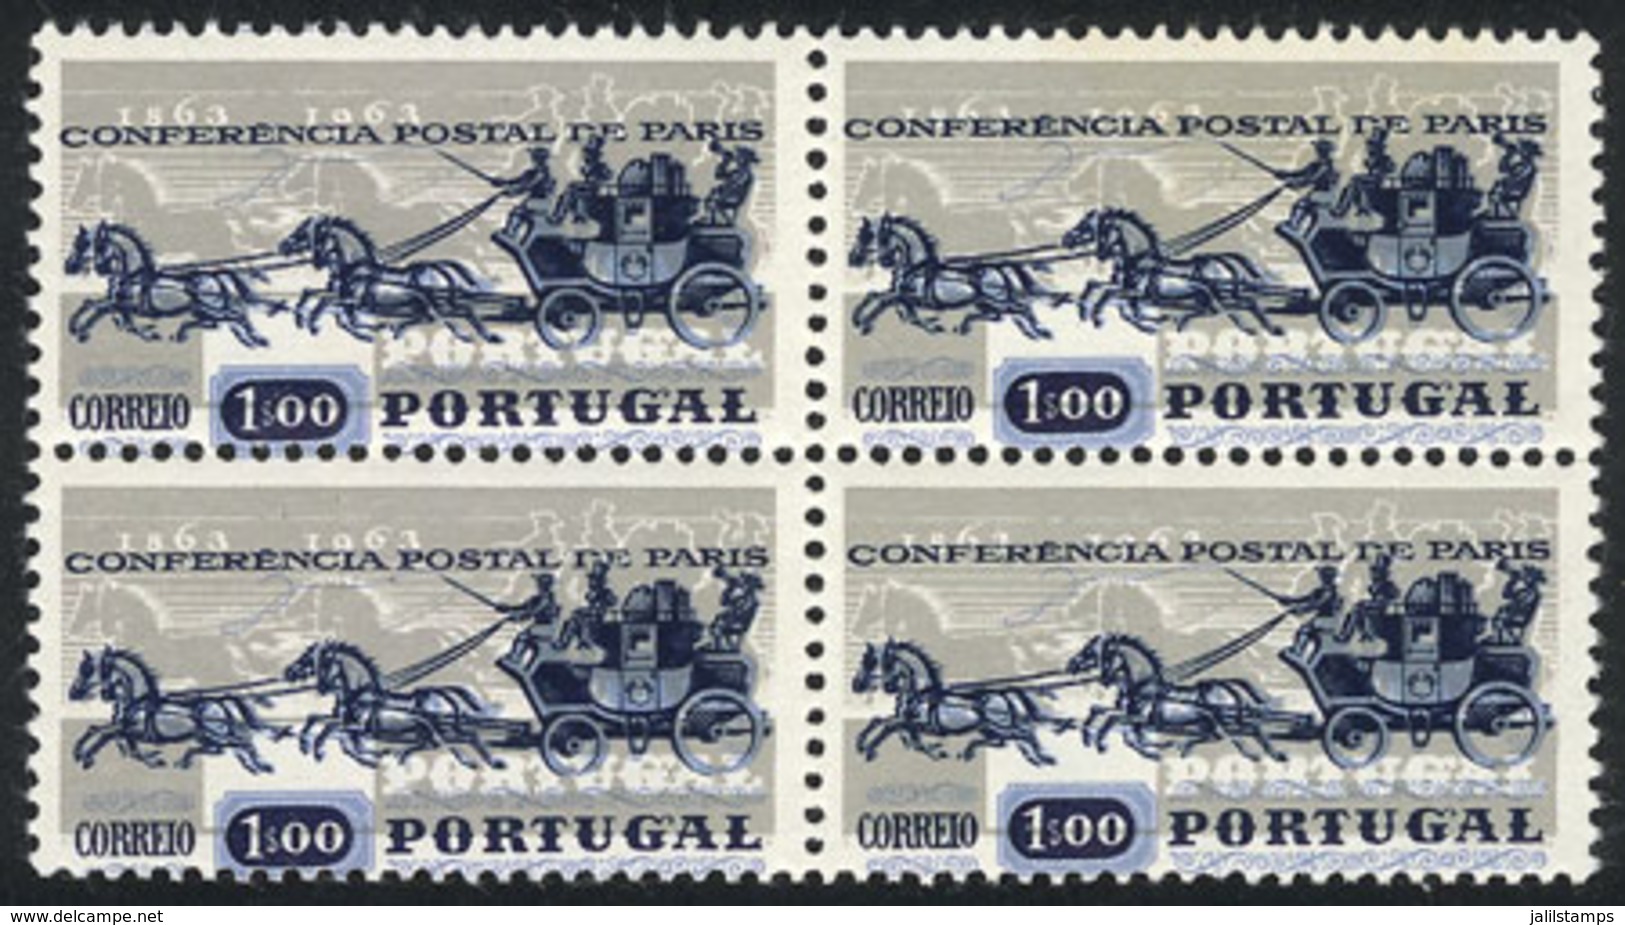 PORTUGAL: Sc.906, 1963 1E. Postal Conference Of Paris, Block Of 4 With VARIETY: Light Blue And Dark Blue Colors With Str - Ungebraucht